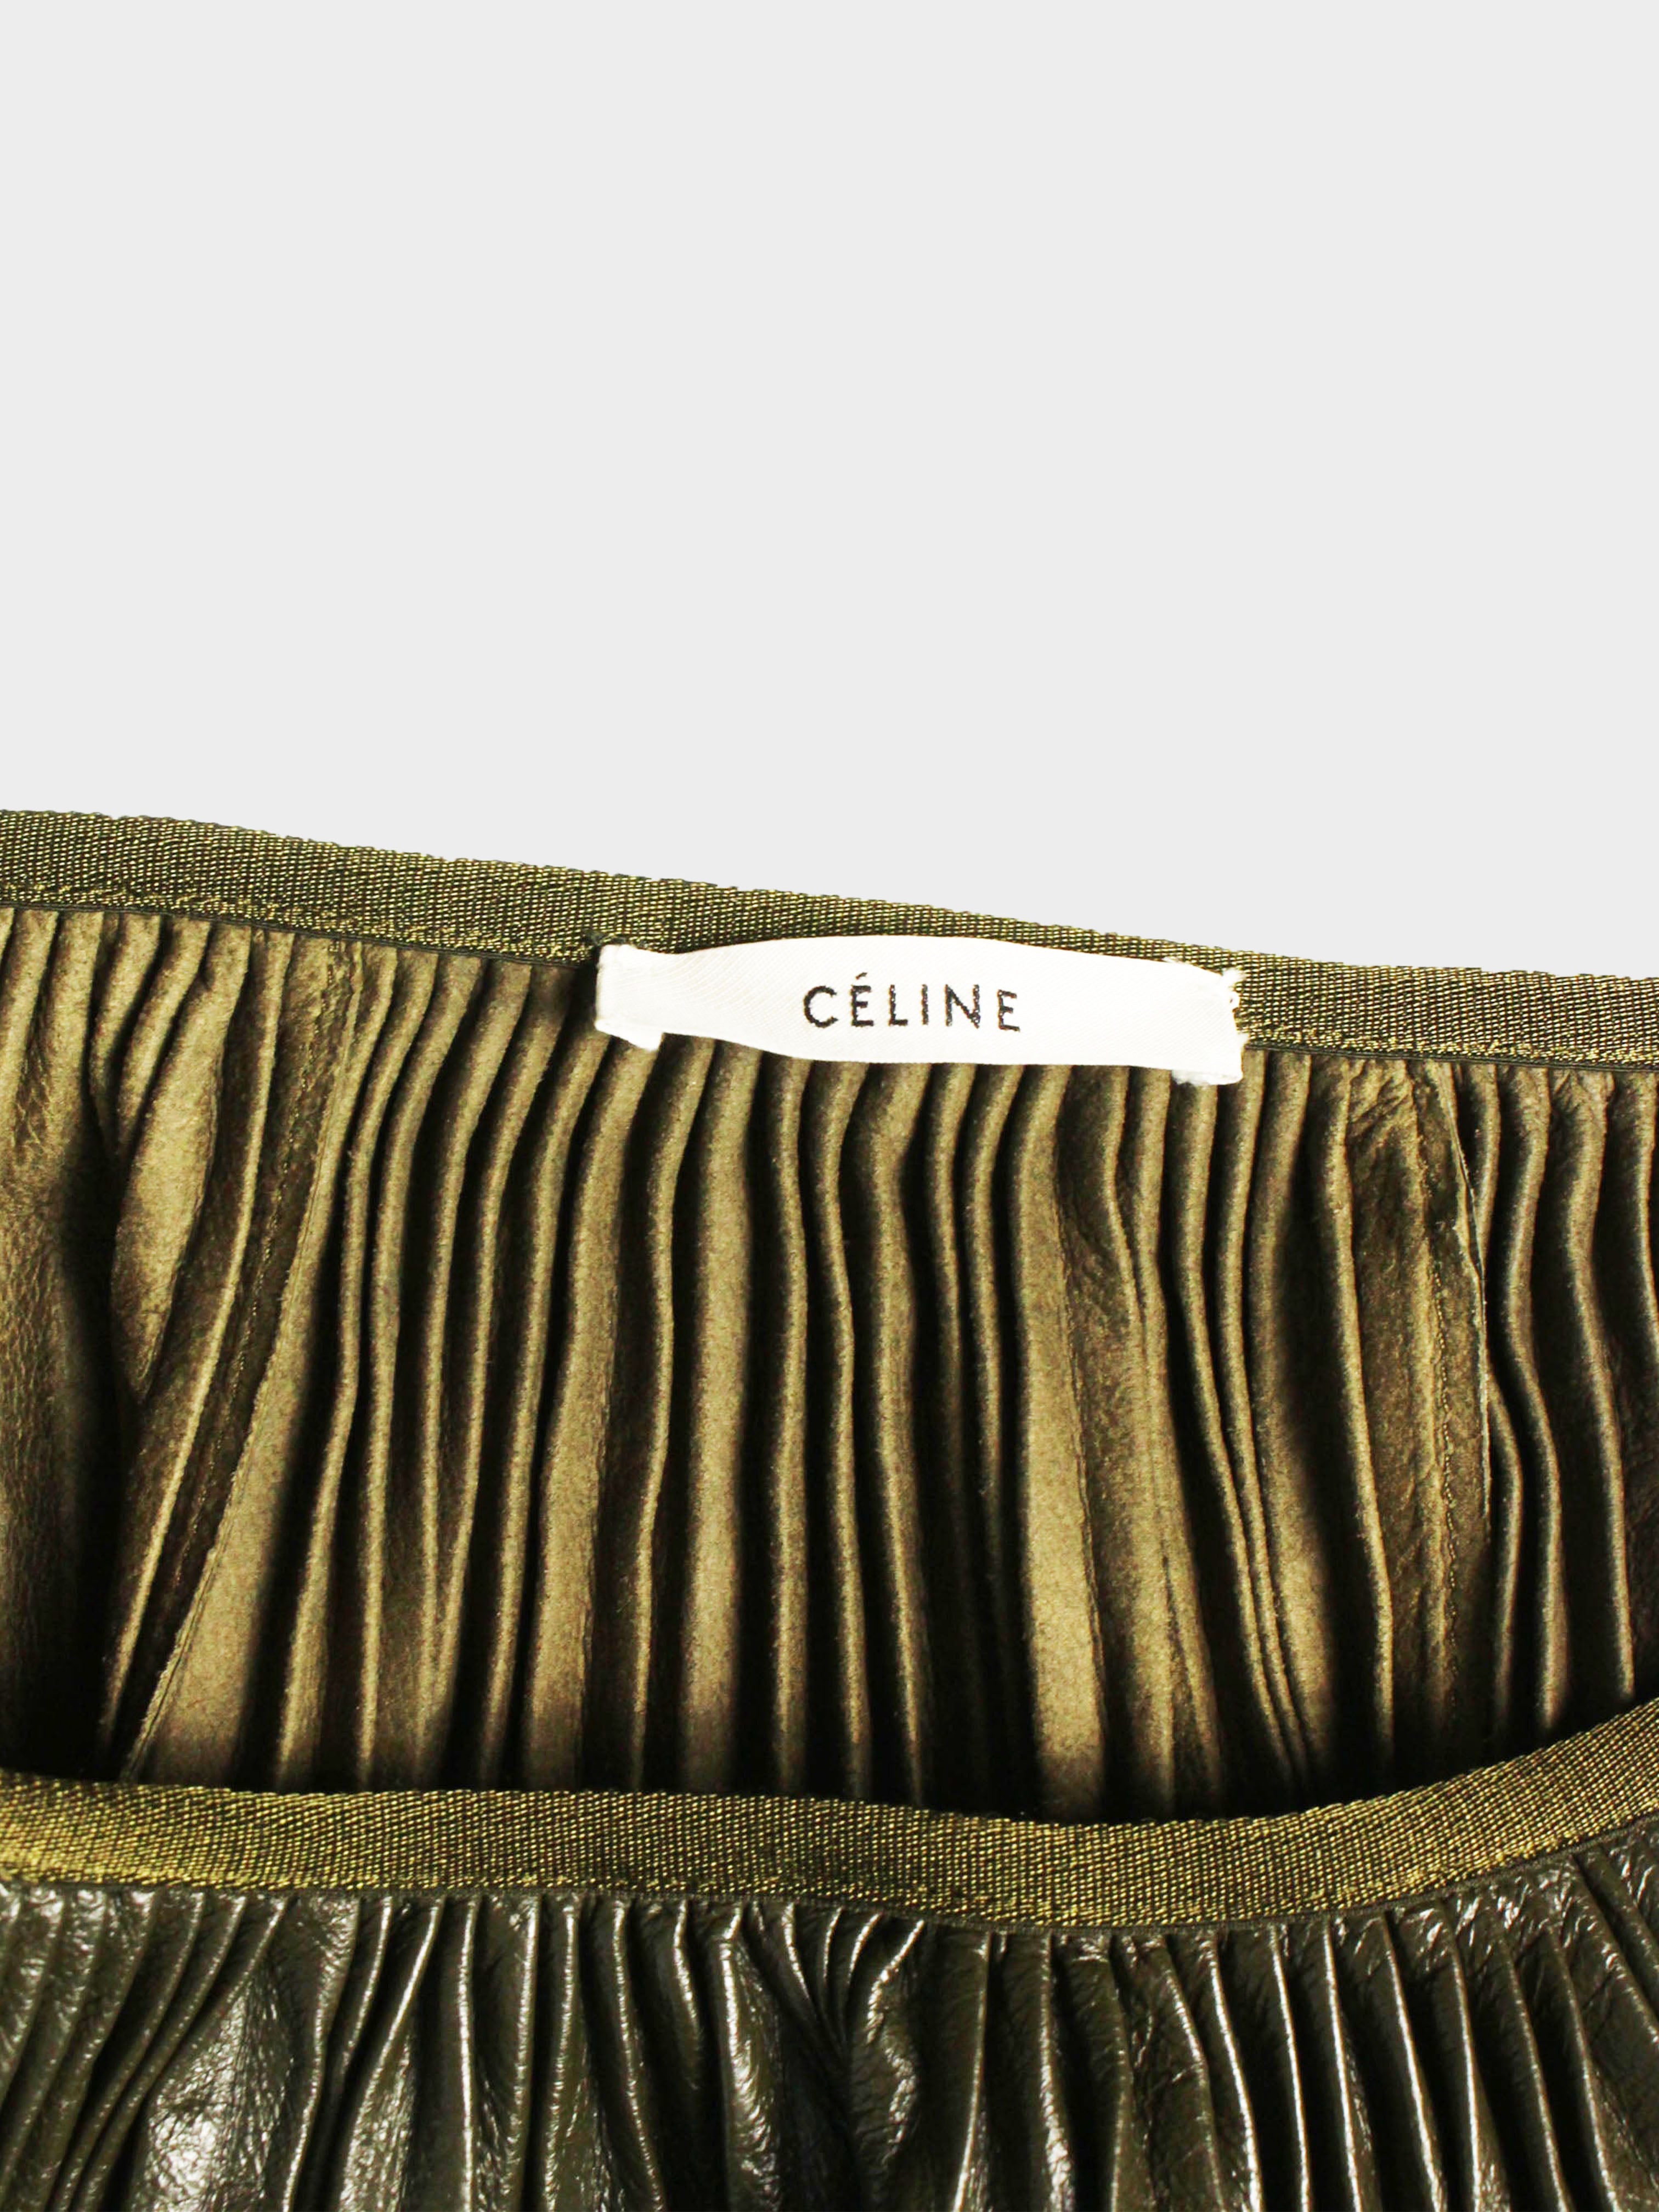 Céline by Phoebe Philo 2010s Pleated Leather Skirt